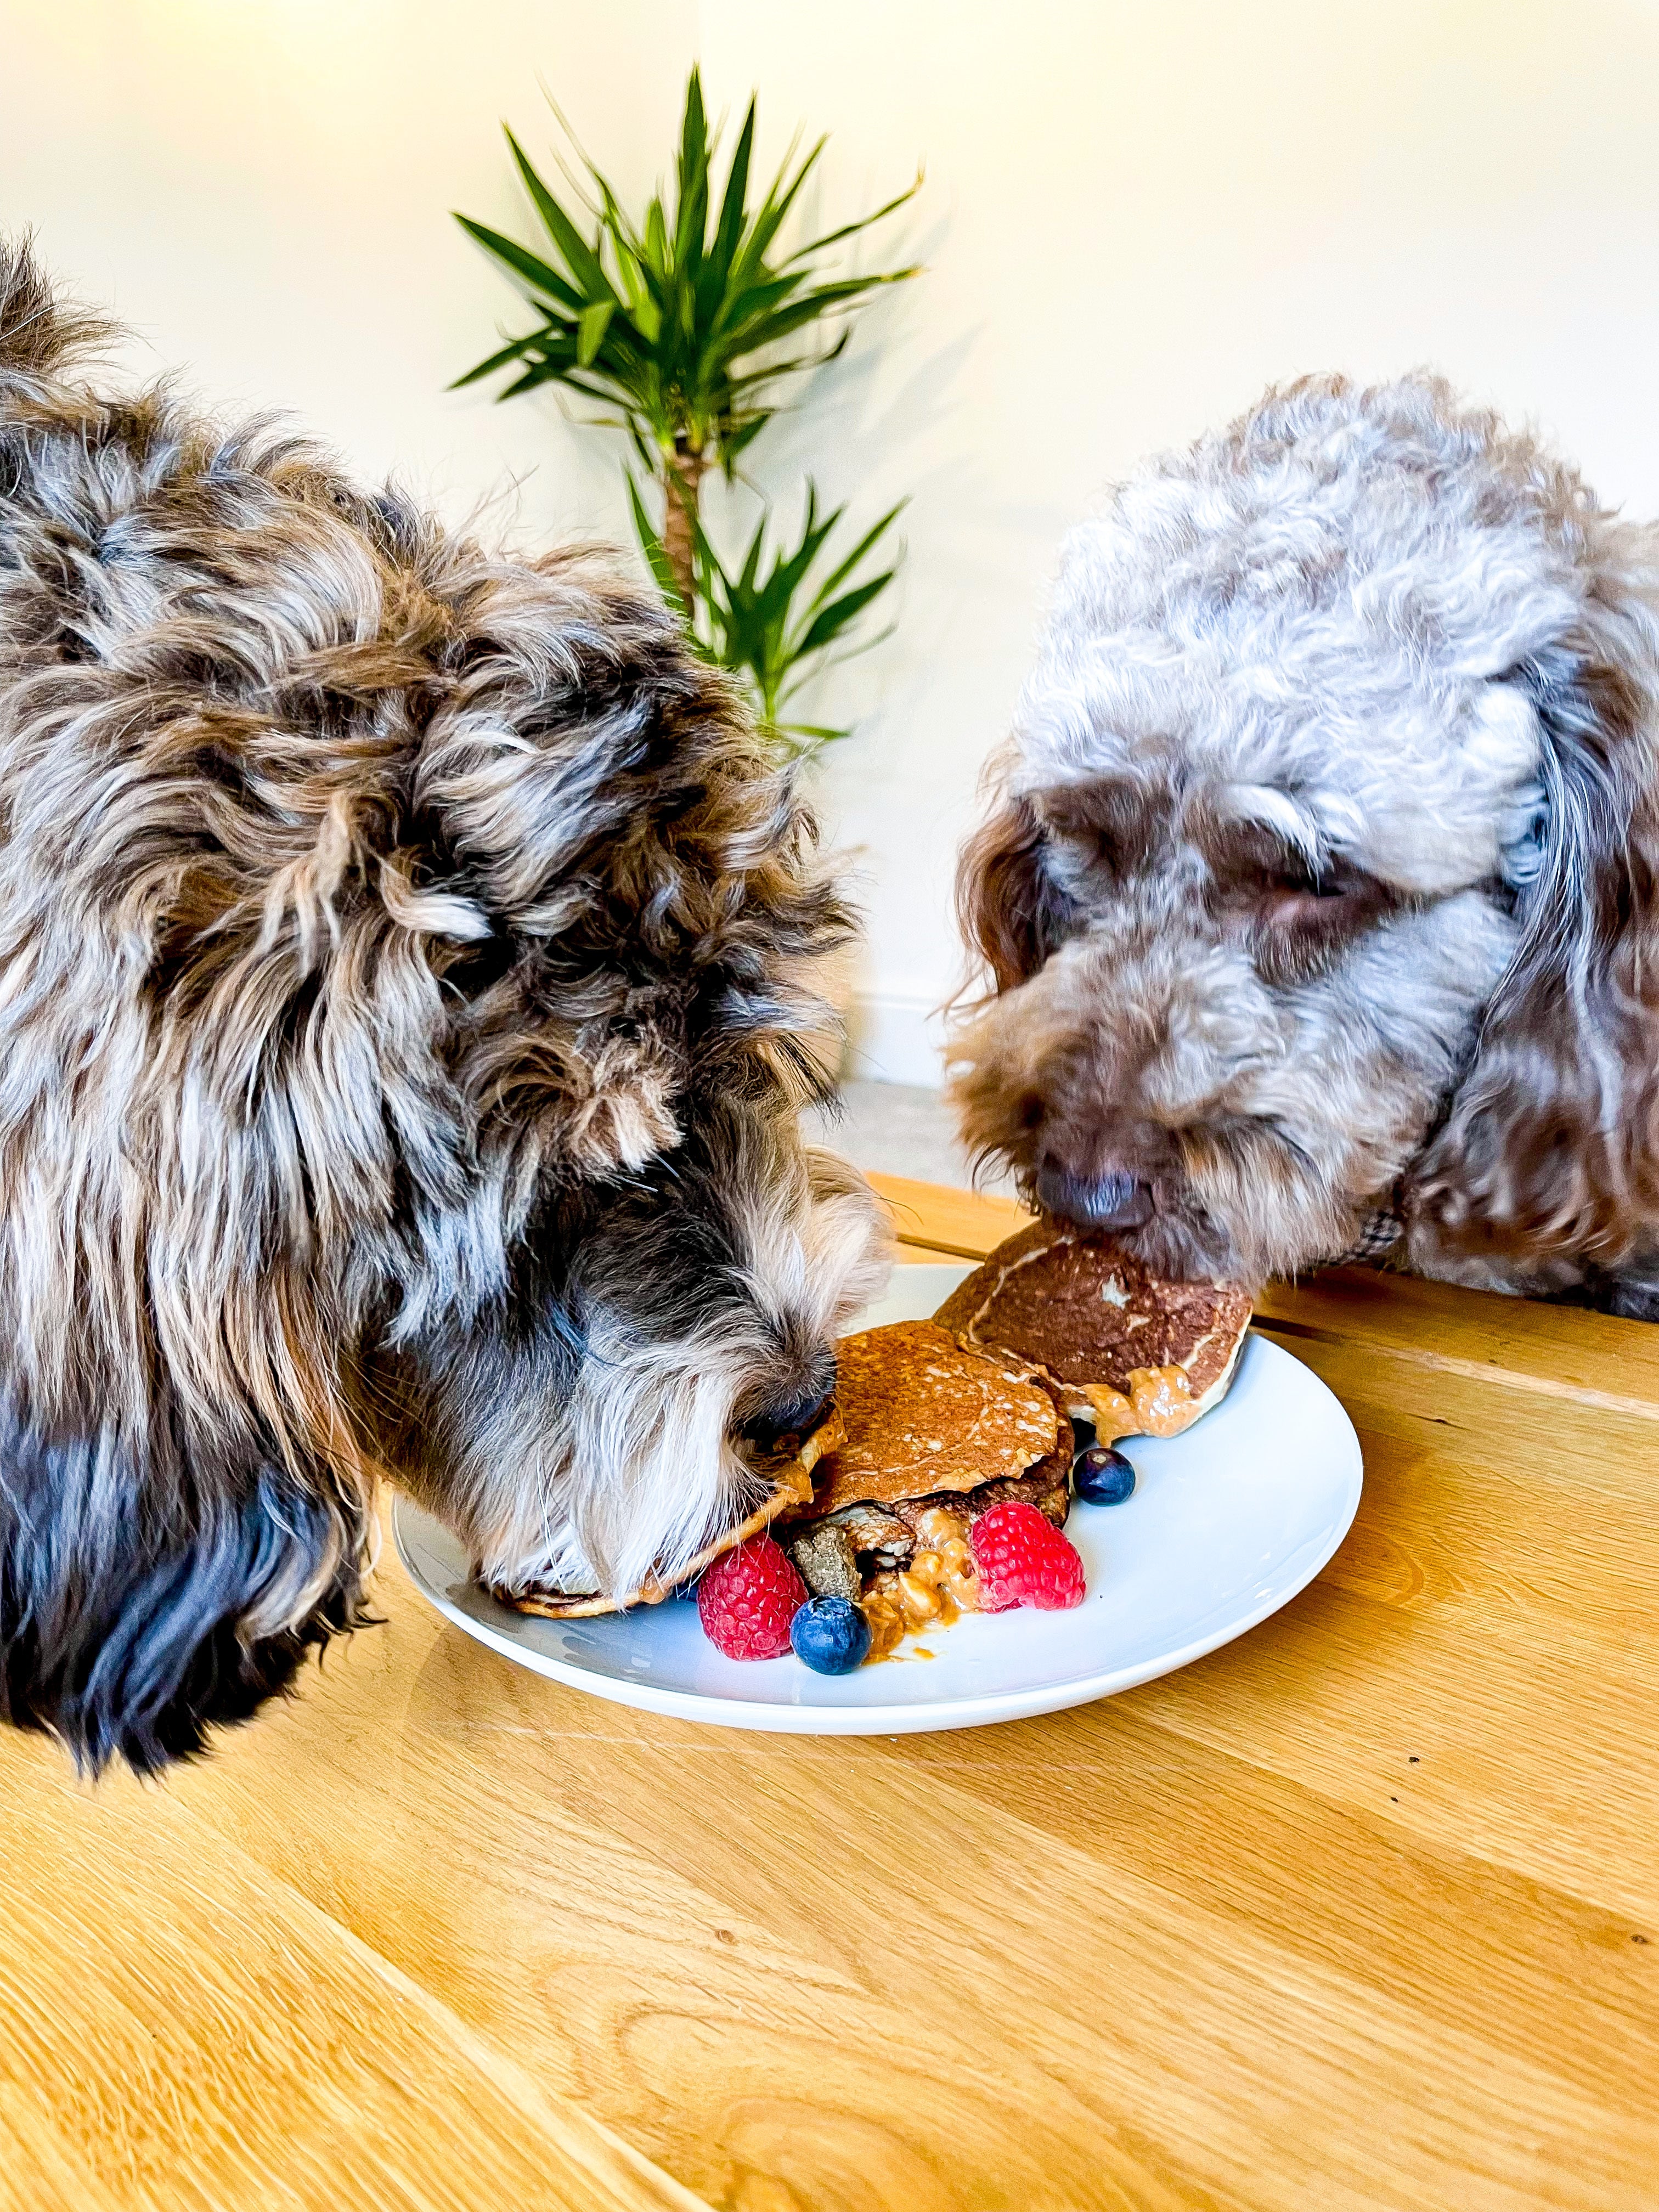 Two curly-haired dogs, one light brown and one great, sharing a plate of pooch-friendly pancakes